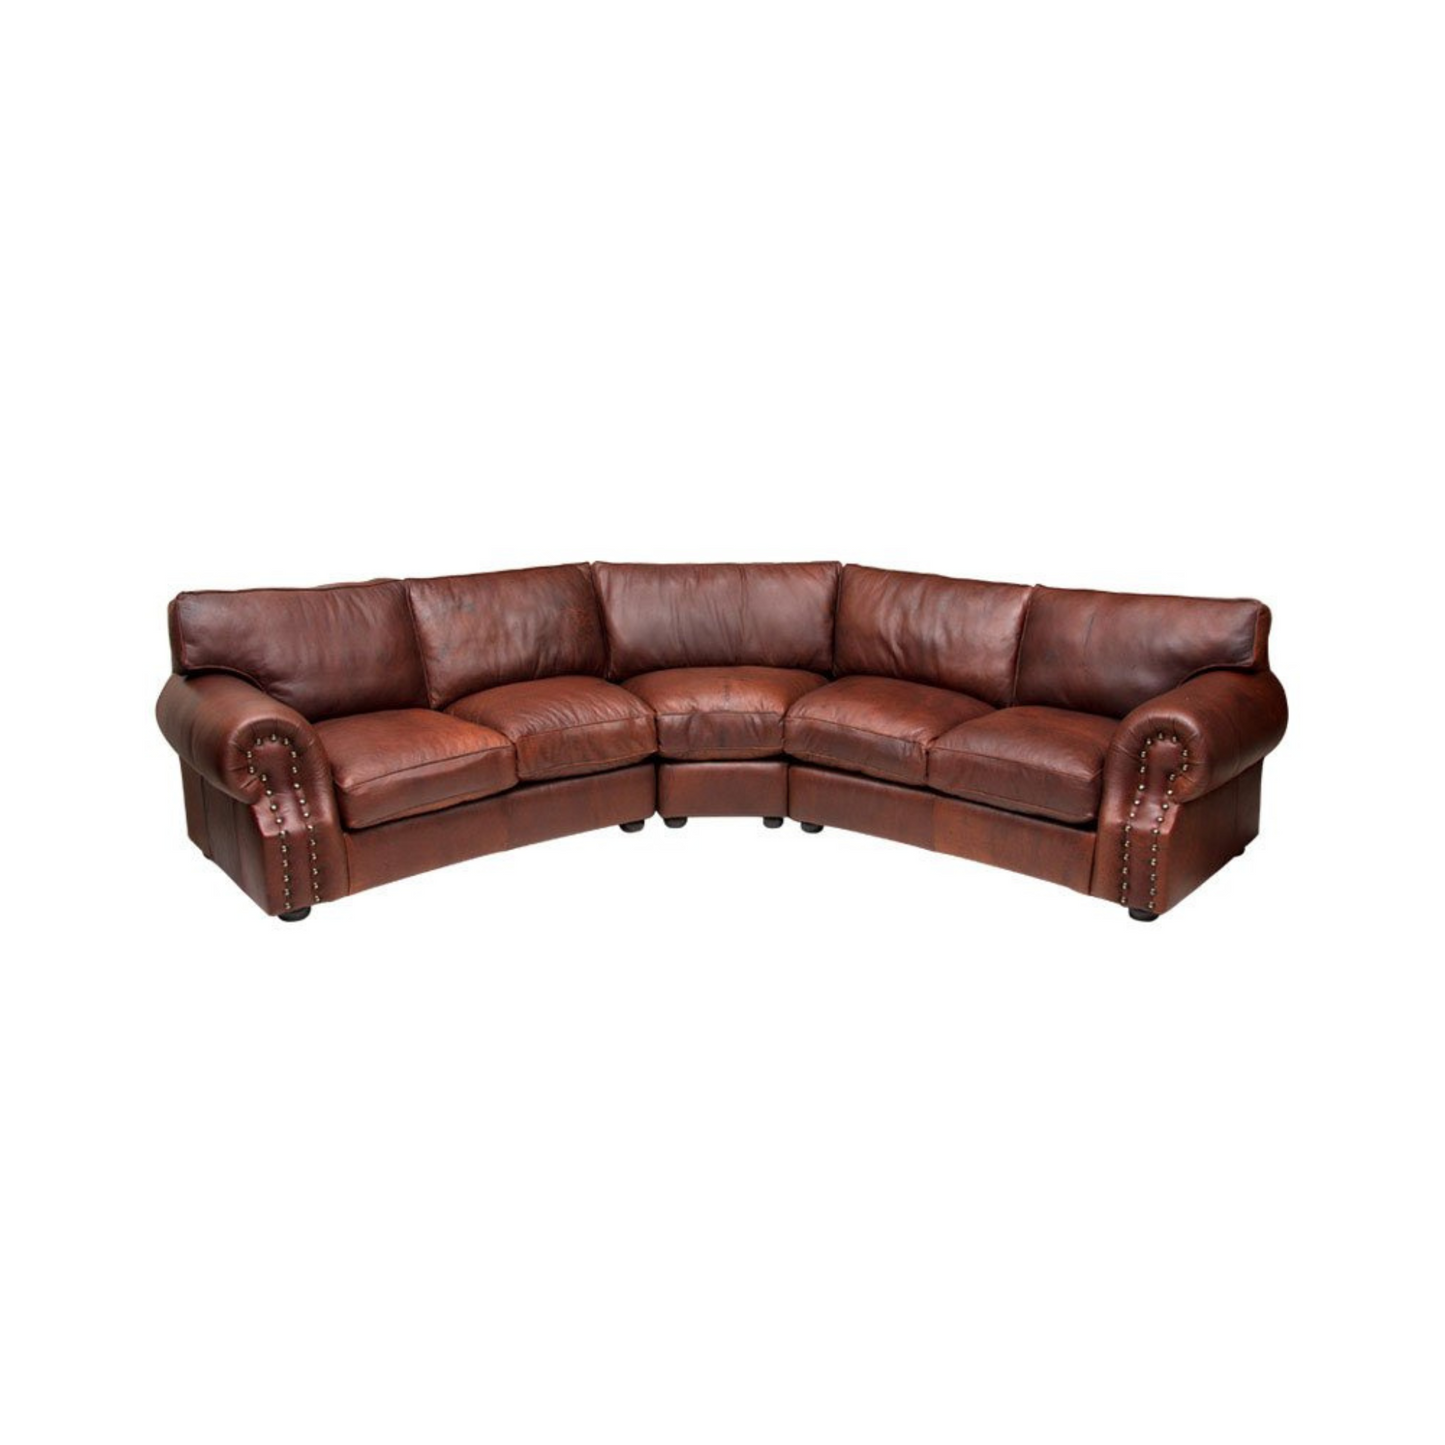 Tugela Sofa – Experience the epitome of luxury with the Tugela sofa. This curved design boasts exceptional comfort with its high back and soft cushions, creating a timeless masterpiece. Enhance the aesthetic with large individual studs.  Custom design this masterpiece to your size and specifications, ensuring a personalized and sophisticated addition to your living space.